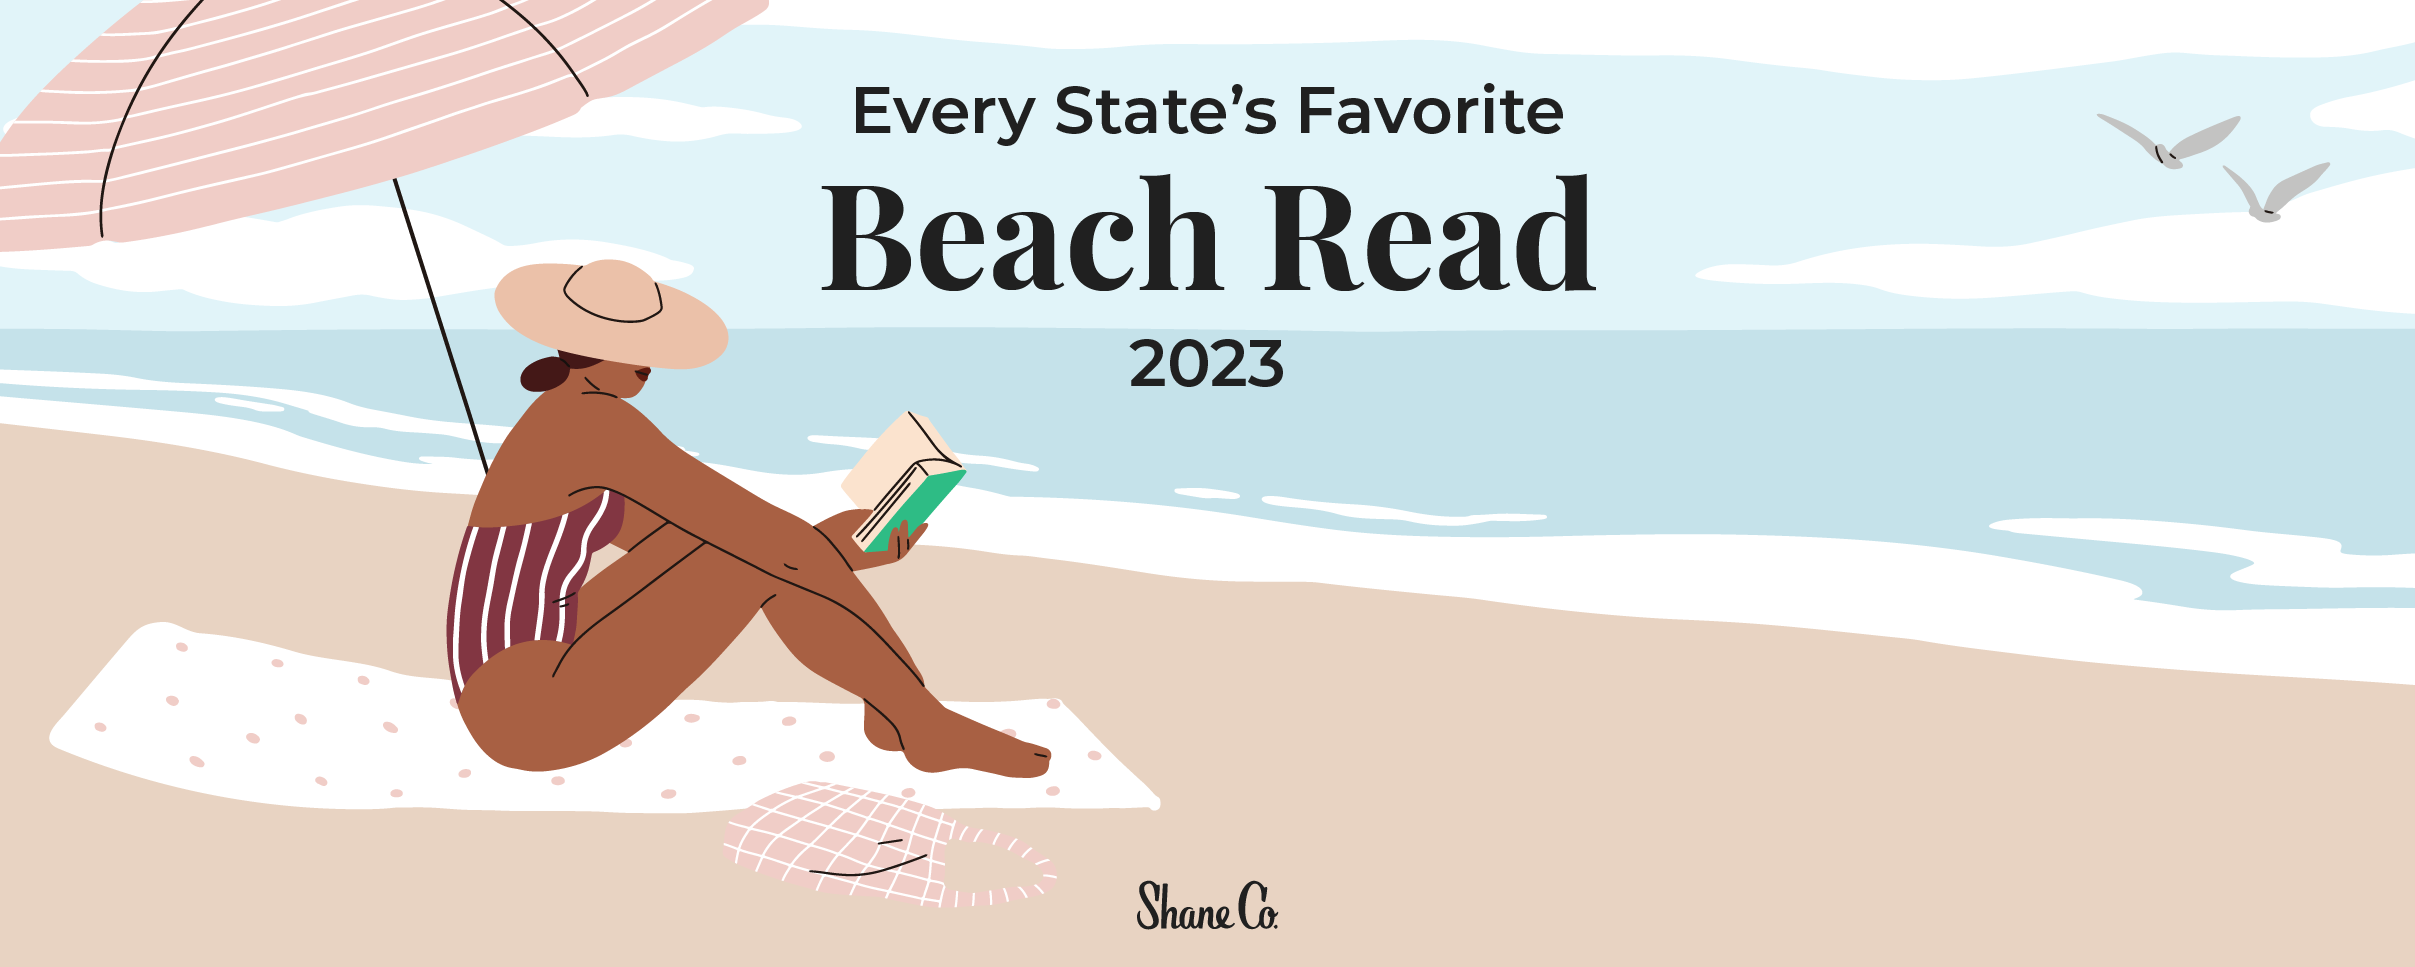 A header image for a blog about the most popular beach reads in every U.S. state